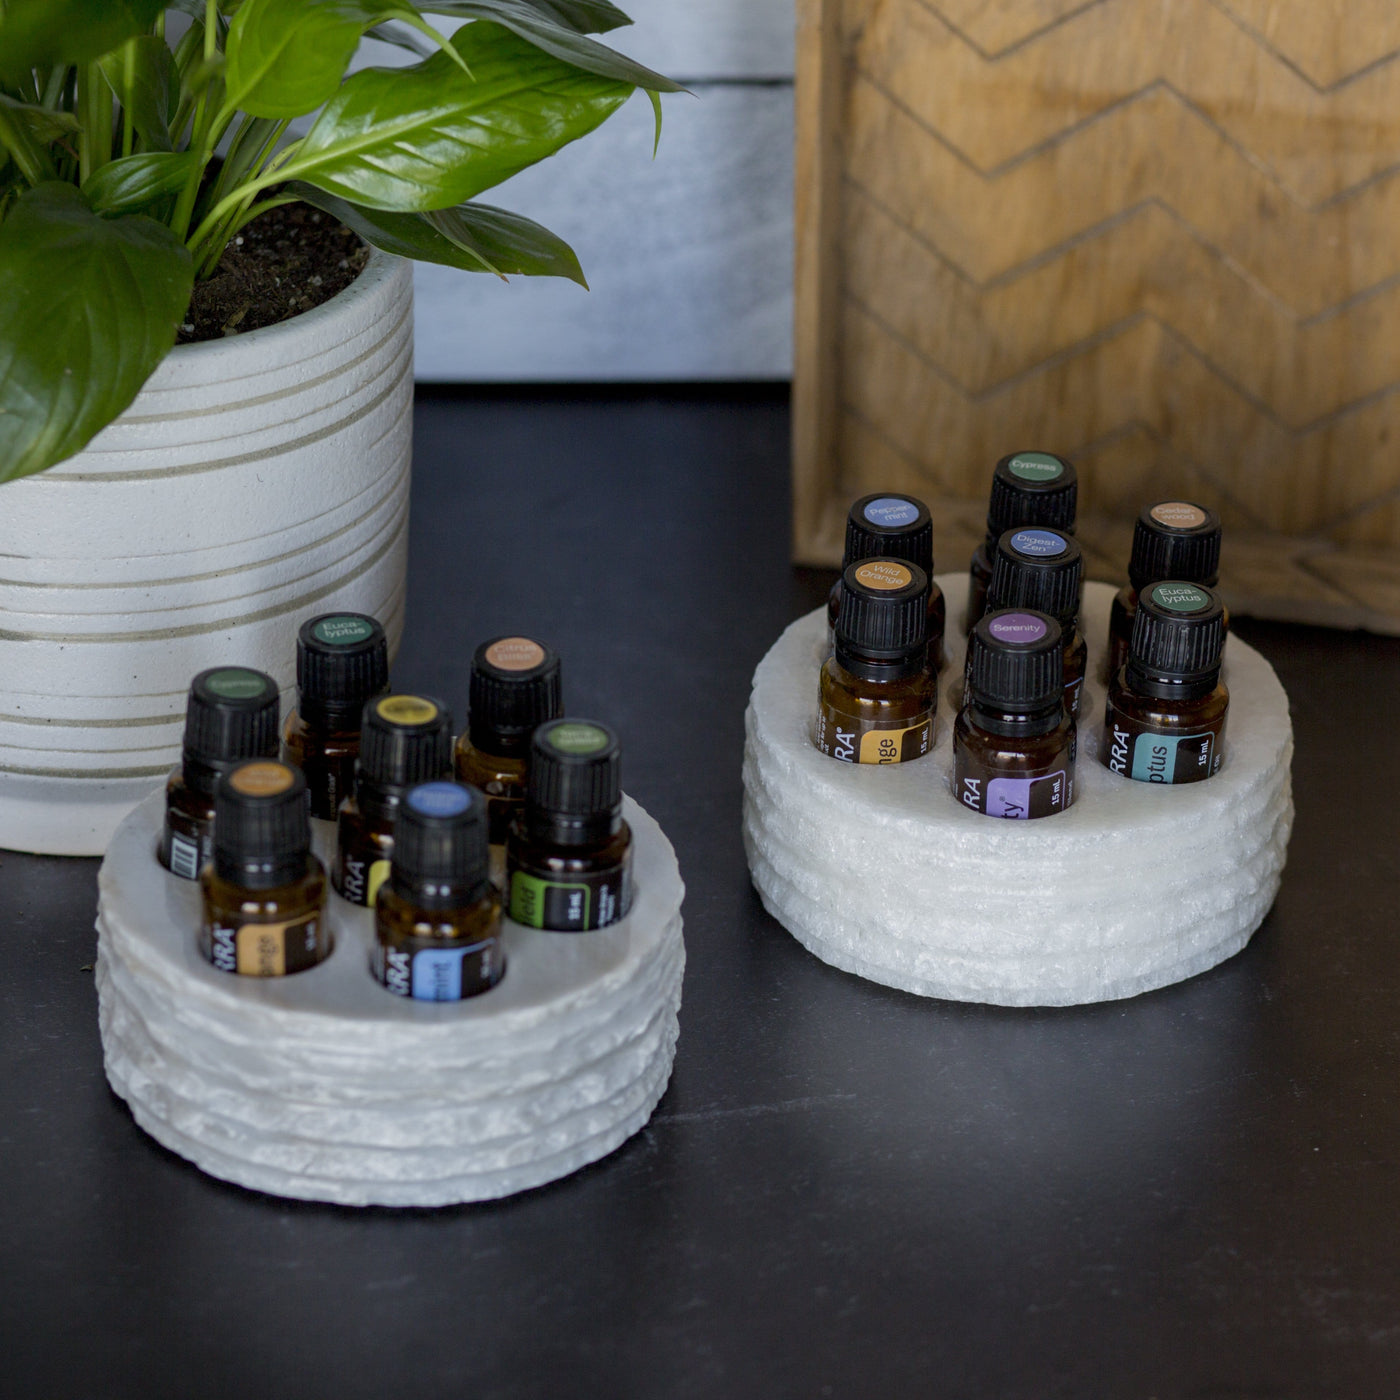 15ml Chiseled Essential Oil Display - Holds 7 - Oil Life Canada - Canada's Best Essential Oil Supplies